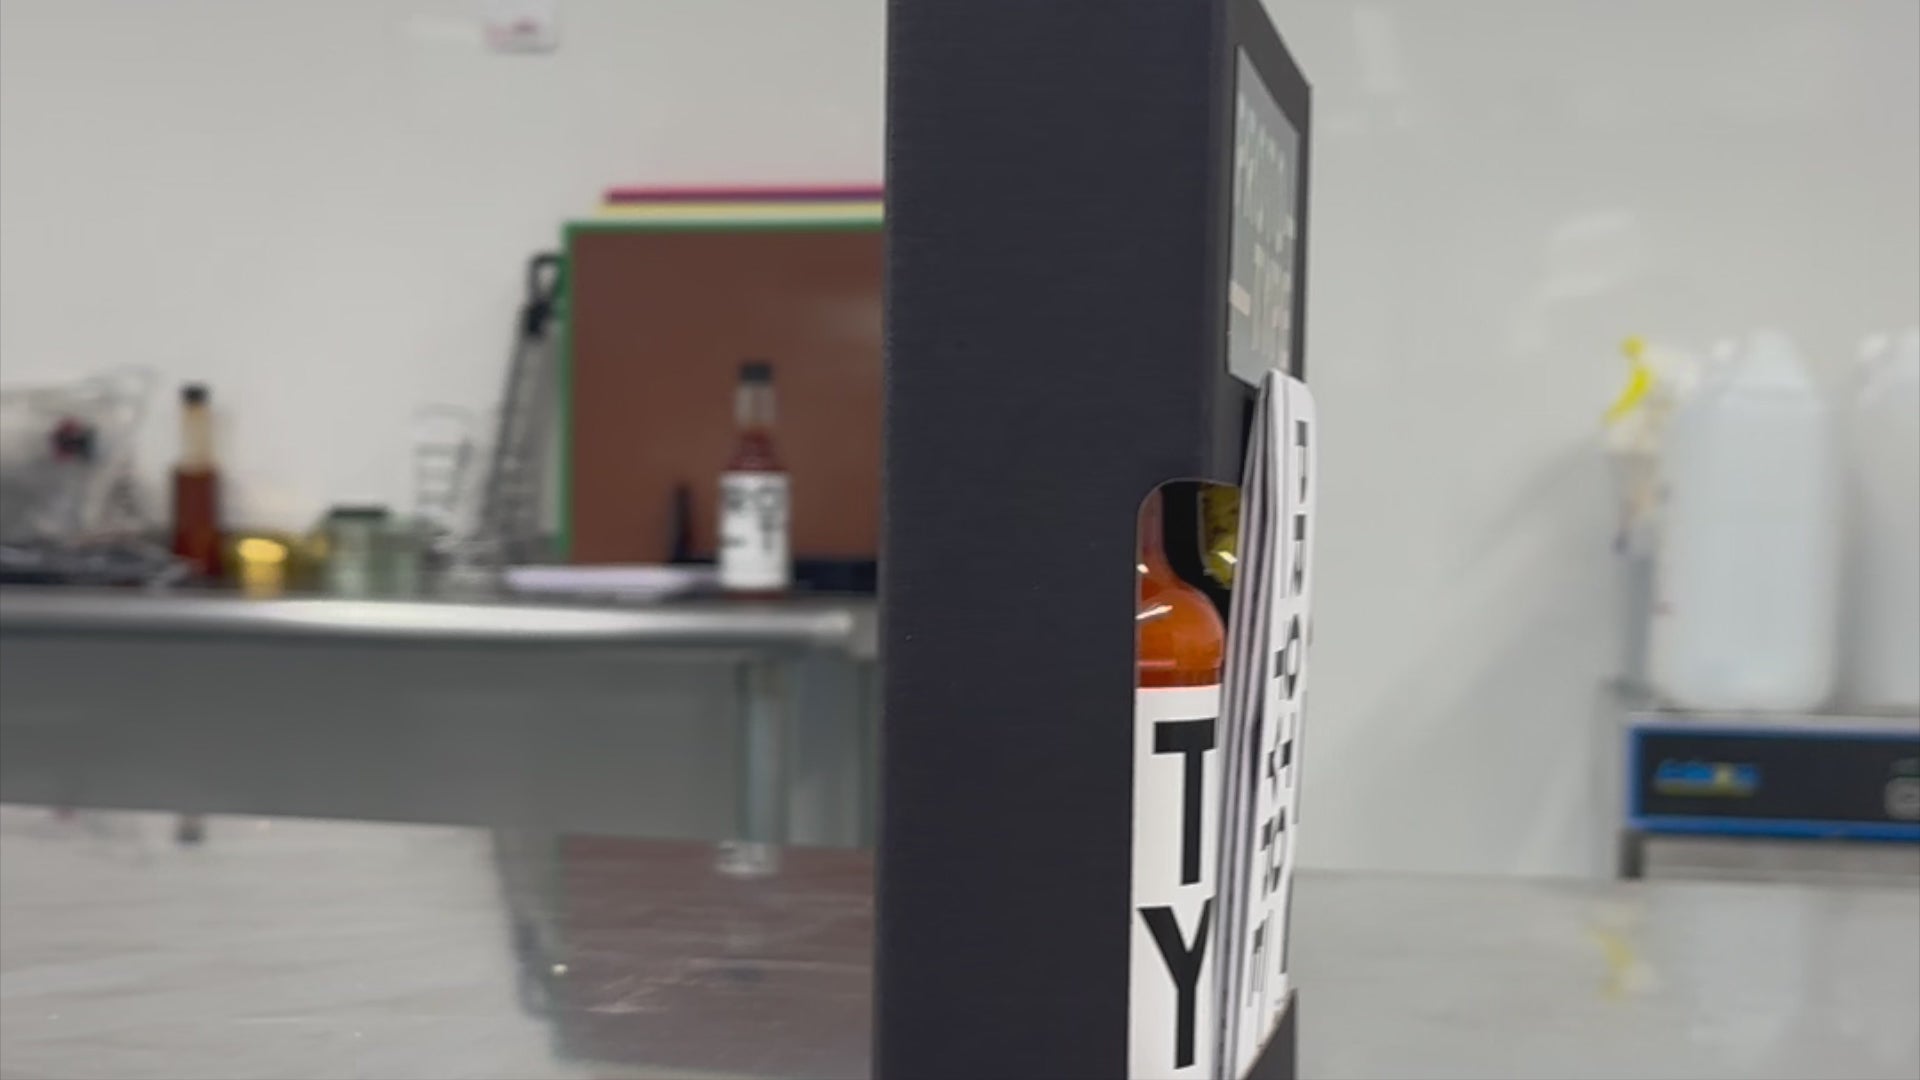 Load video: Rotating around the prototype club box, showing three sauces and and a folded info sheet